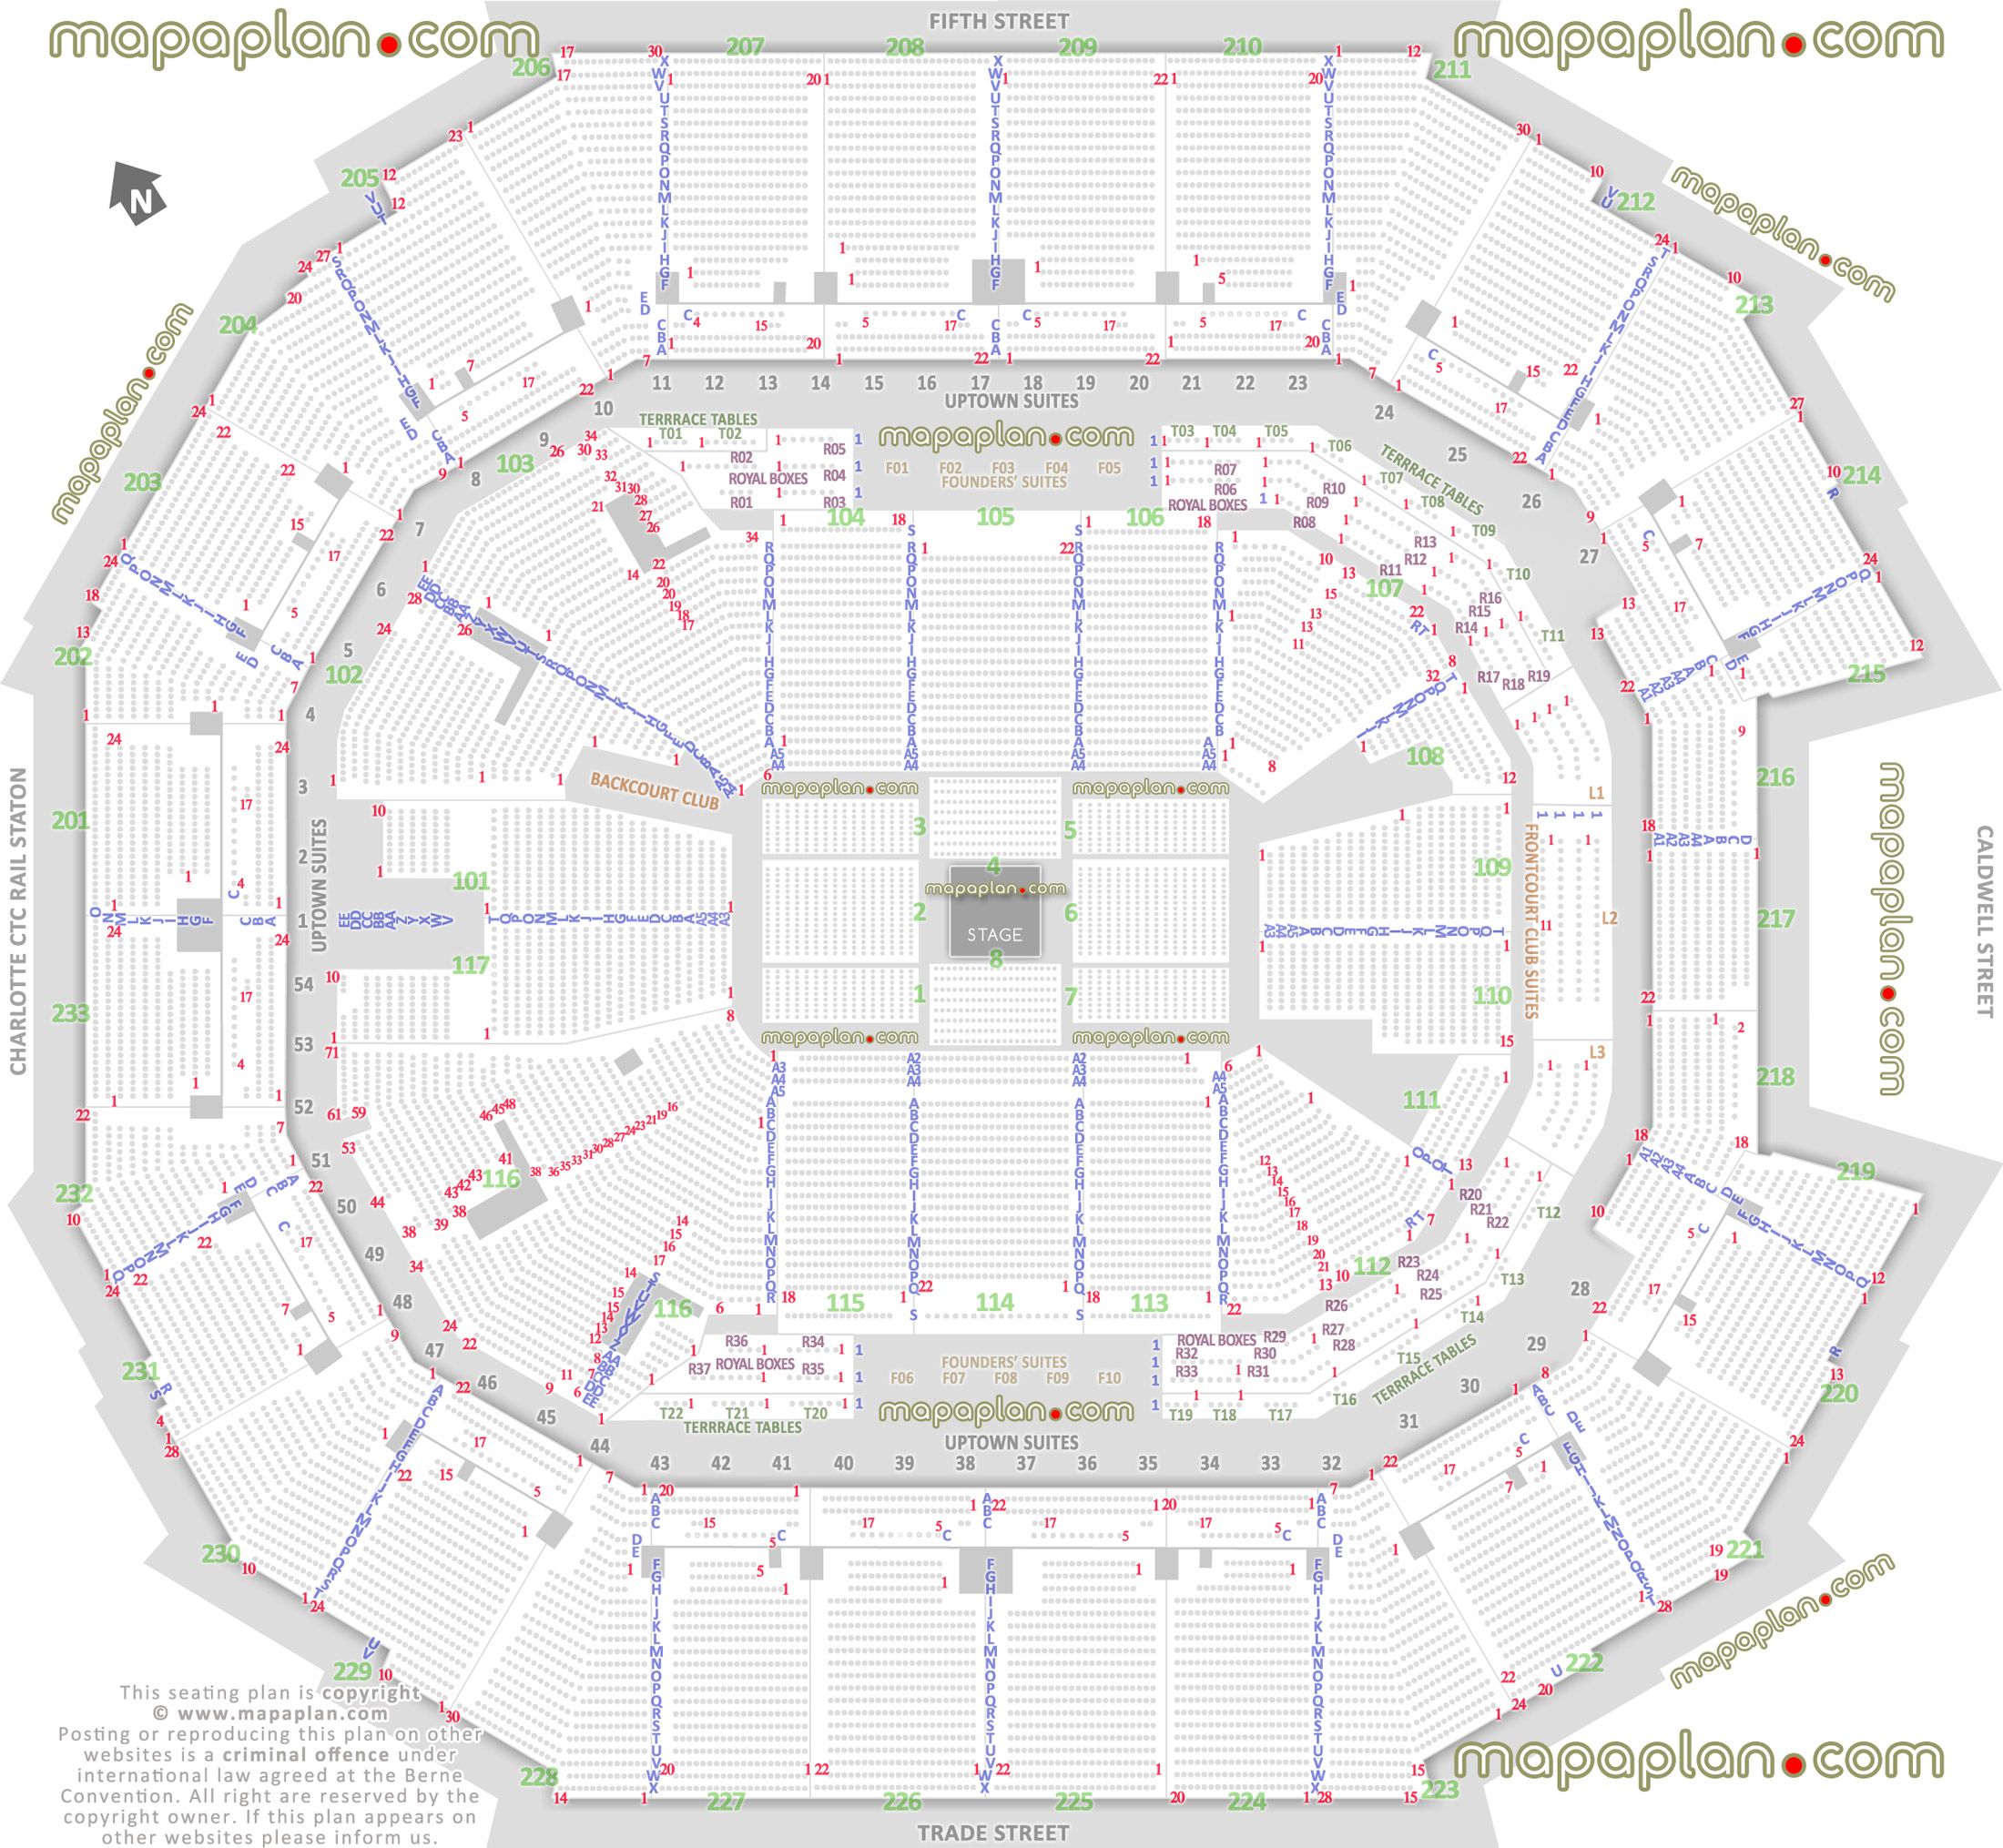 concert stage round printable virtual layout 360 degree arrangement diagram seats row lower upper sections frontcourt backcourt club uptown founders party suites lawn a1 a2 a3 a4 a5 a b c d e f g h i j k l m n o p q r s t u v w x y z aa bb cc dd ee Charlotte Spectrum Center seating chart